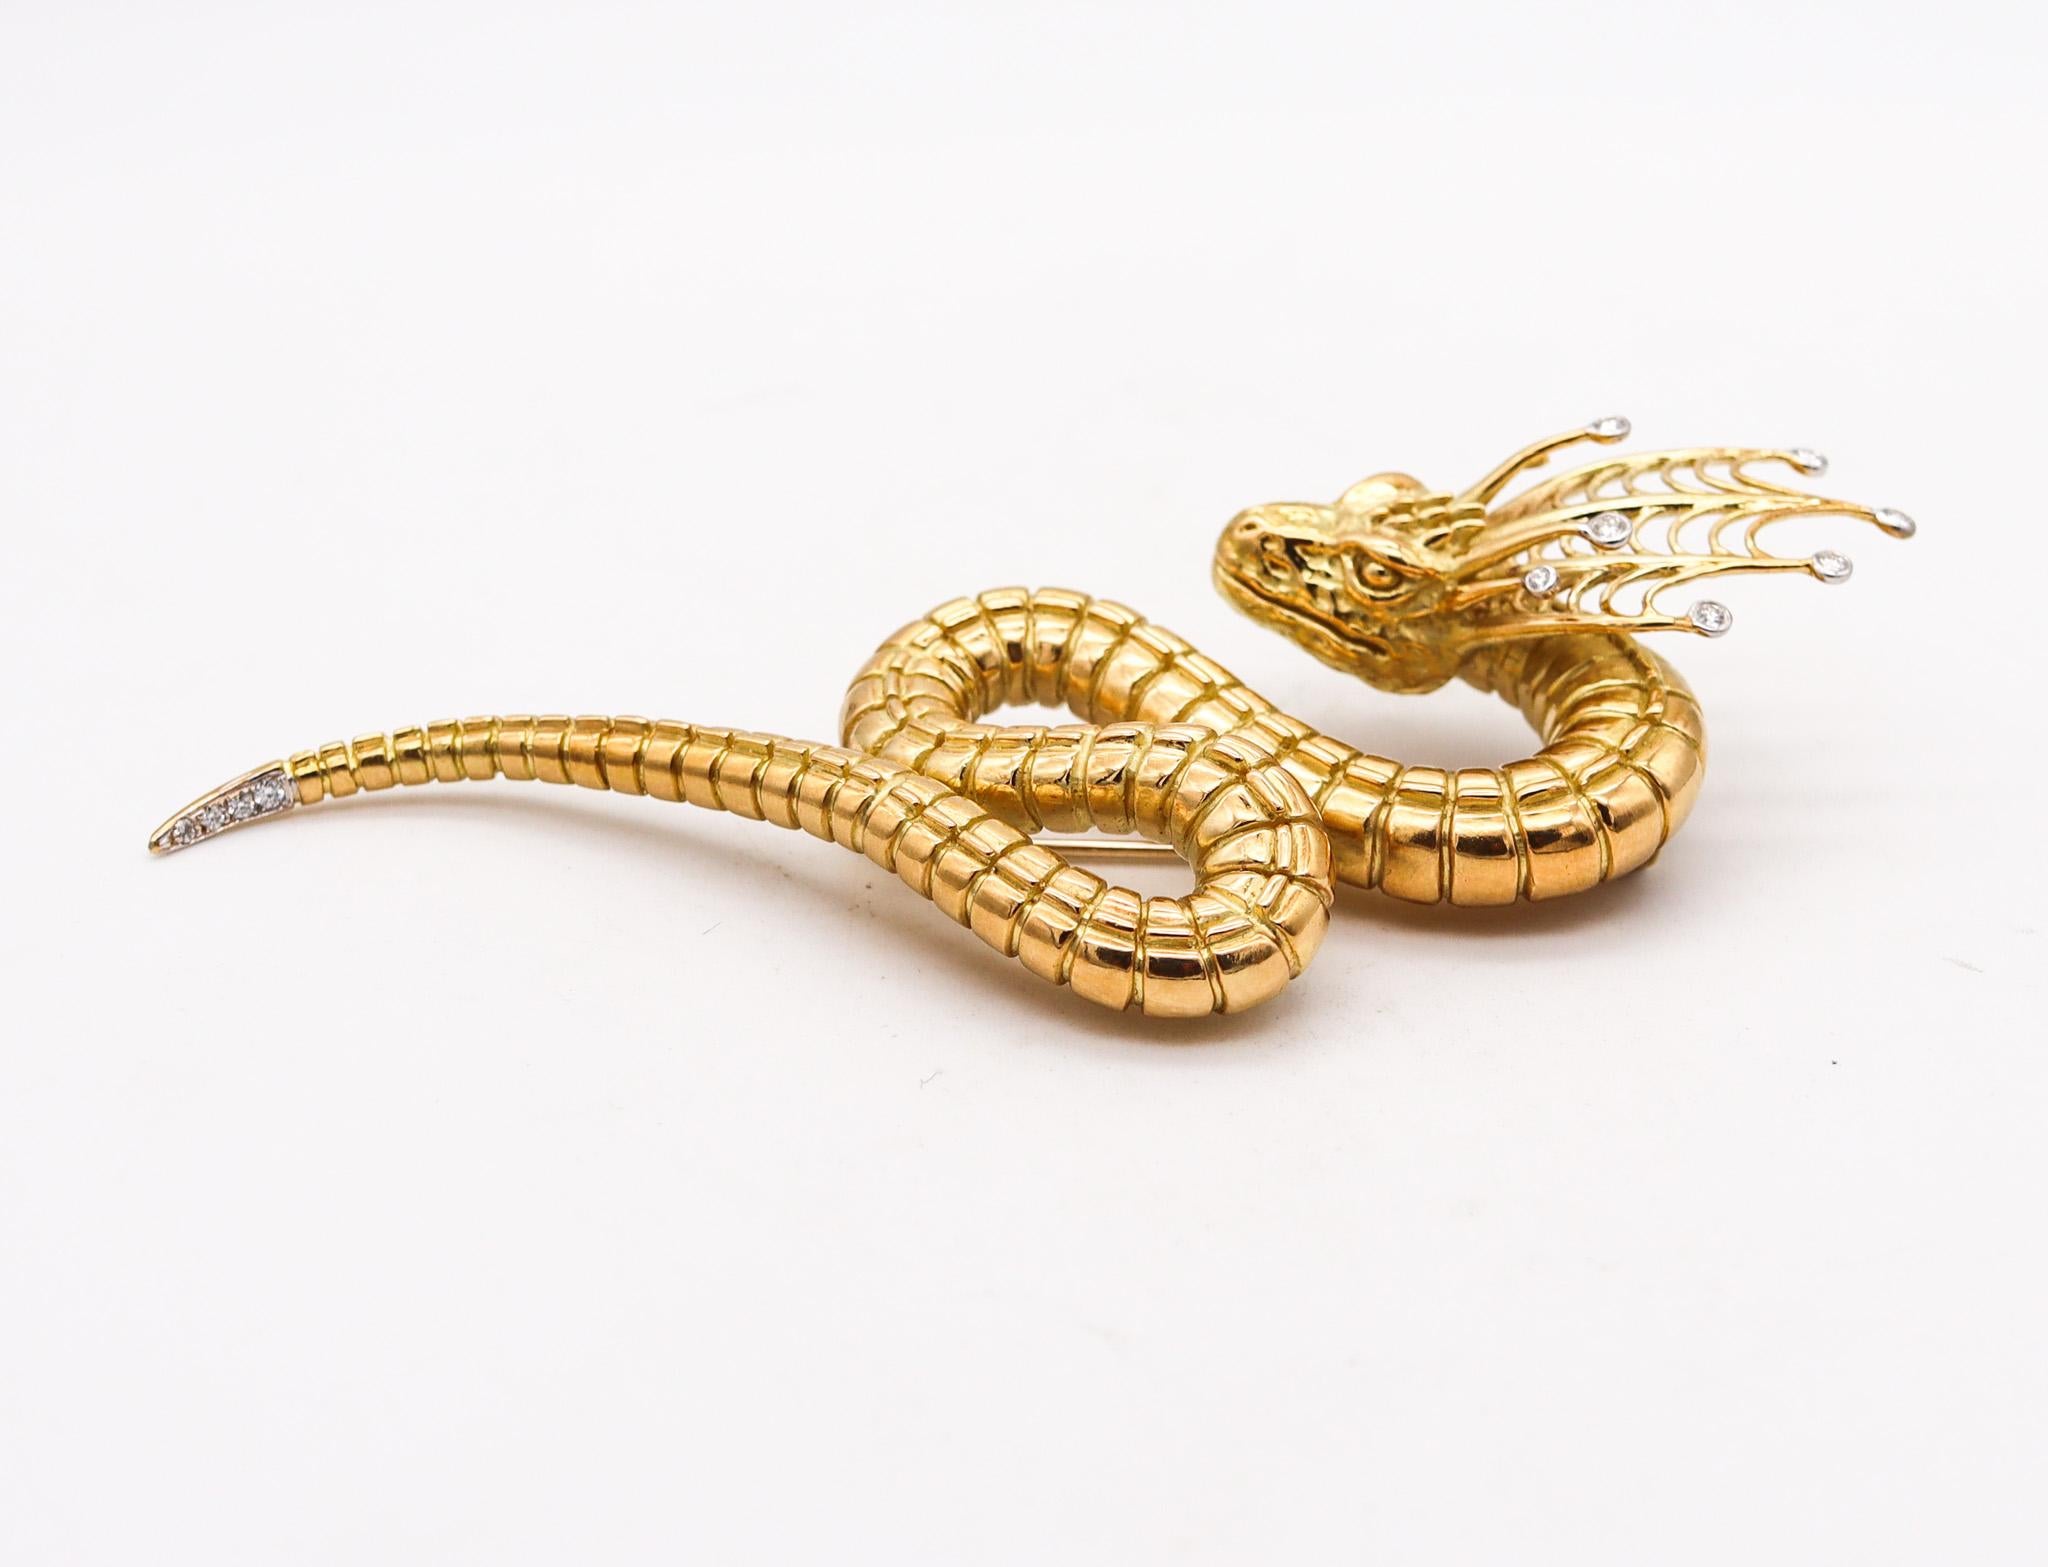 Brilliant Cut John Landrum Bryant Serpent Brooch In 18Kt Yellow Gold With VVS Diamonds For Sale